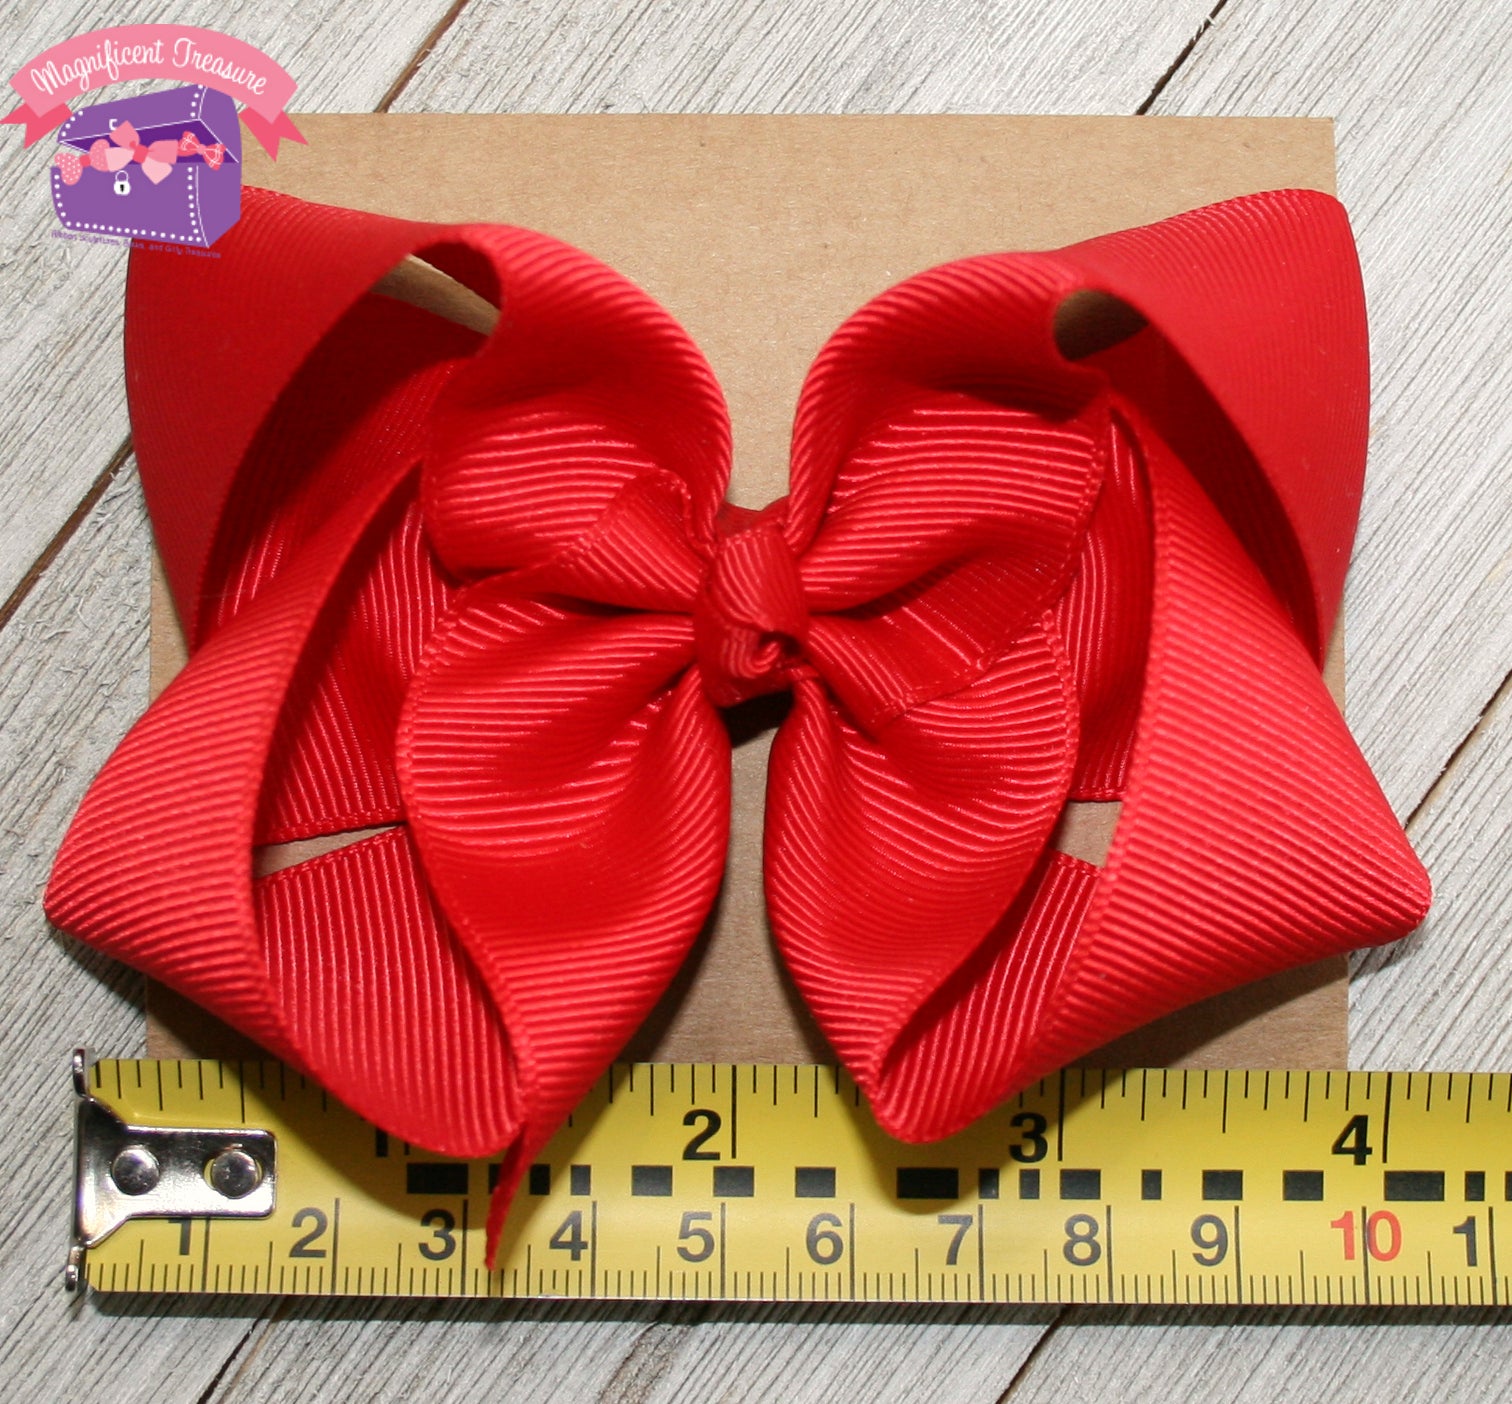 4 Inch Girls Hair Bow Double Prong Alligator Clip Size